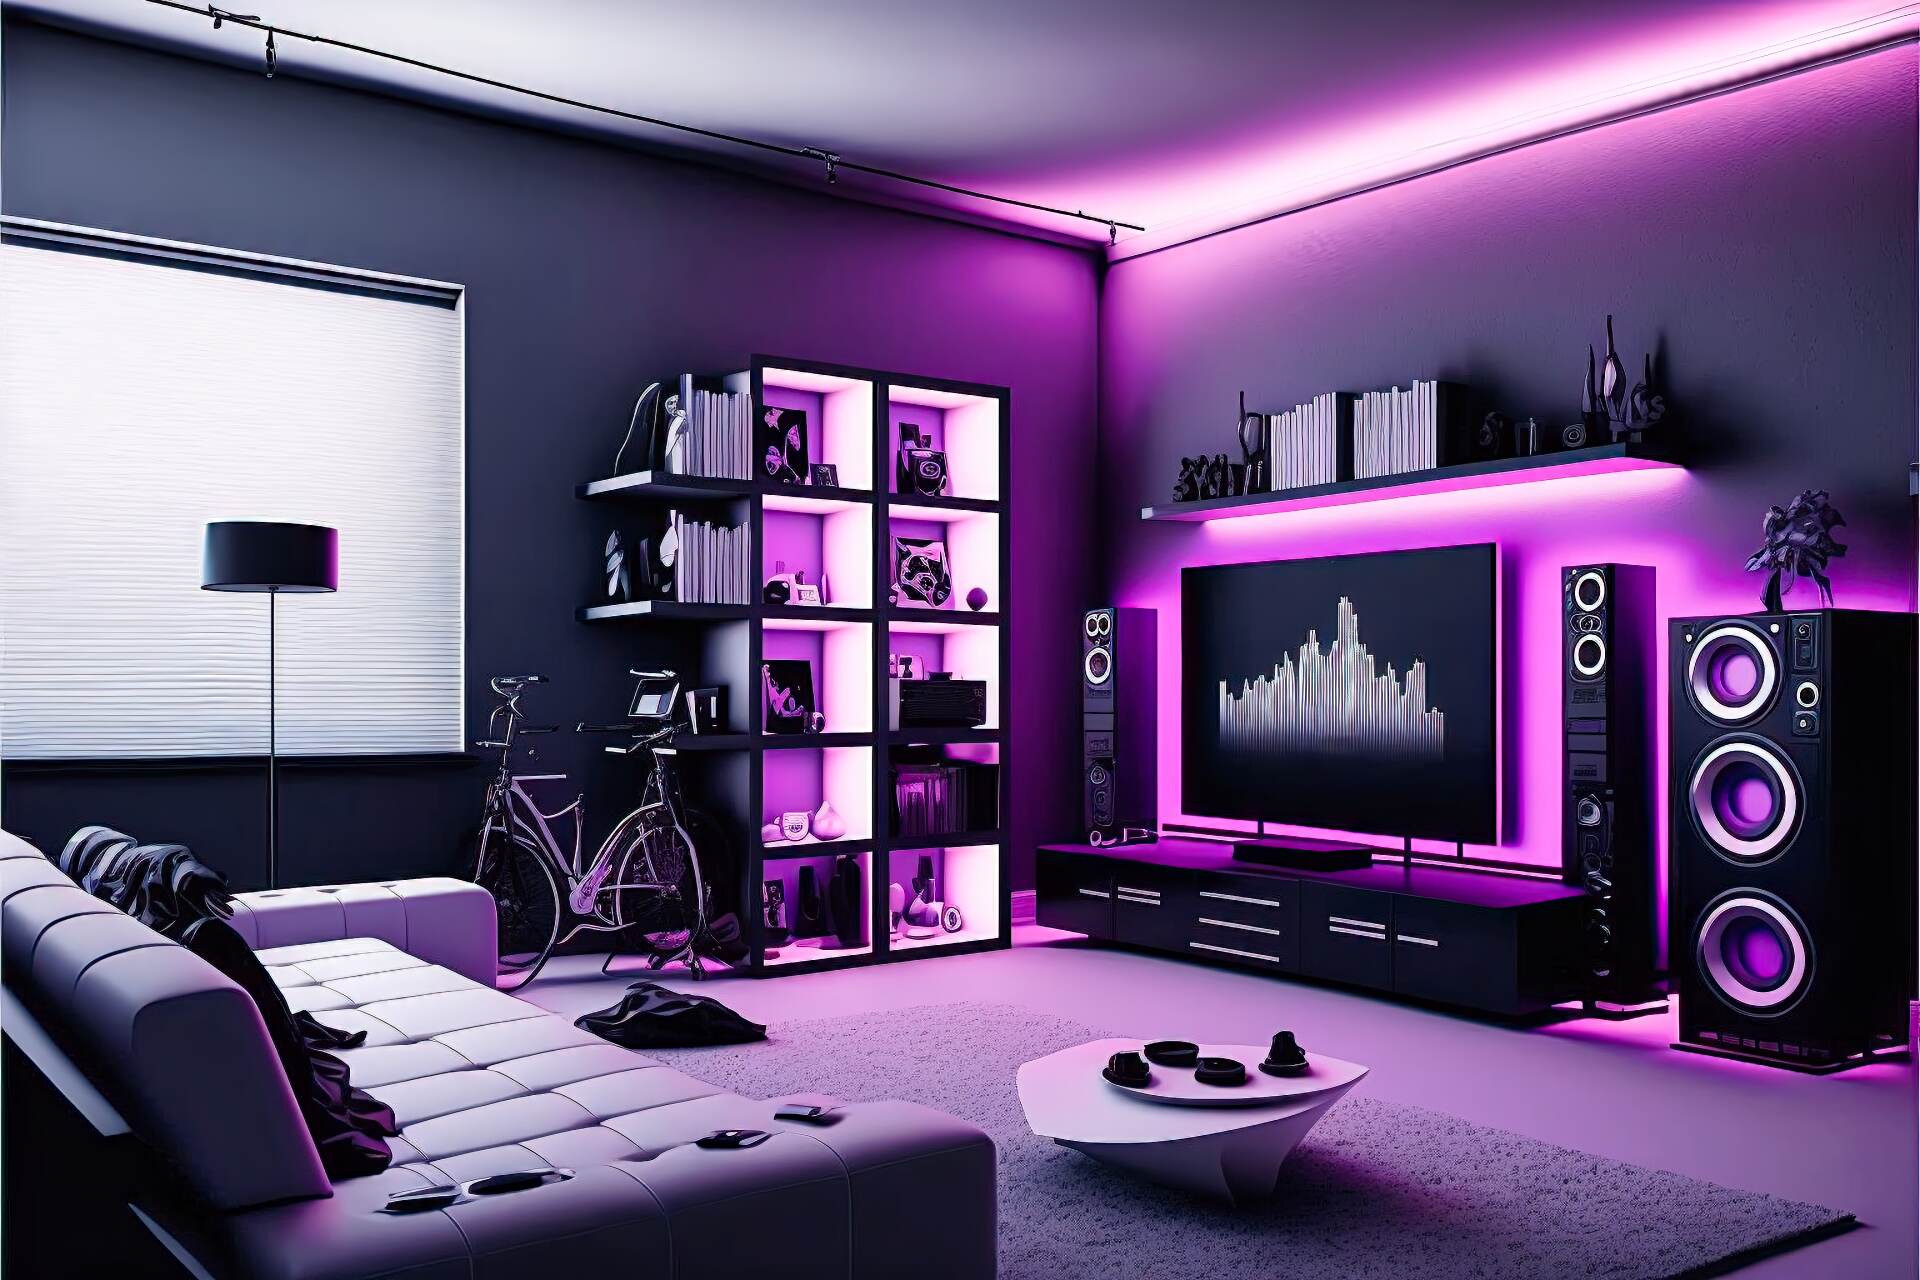 A Cyberpunk-Style Living Room With A Neon Cybertopia Vibe. The Walls Are Painted Black And Adorned With Neon Lights In Various Shades Of Purple. The Furniture Is Made Up Of Sleek And Modern Pieces In A Monochromatic Color Scheme Of Black And White. A Large Flat Screen Tv Is Mounted On The Wall, Surrounded By More Neon Lights. A High-Tech Sound System And A Virtual Reality Gaming Console Complete The Look.